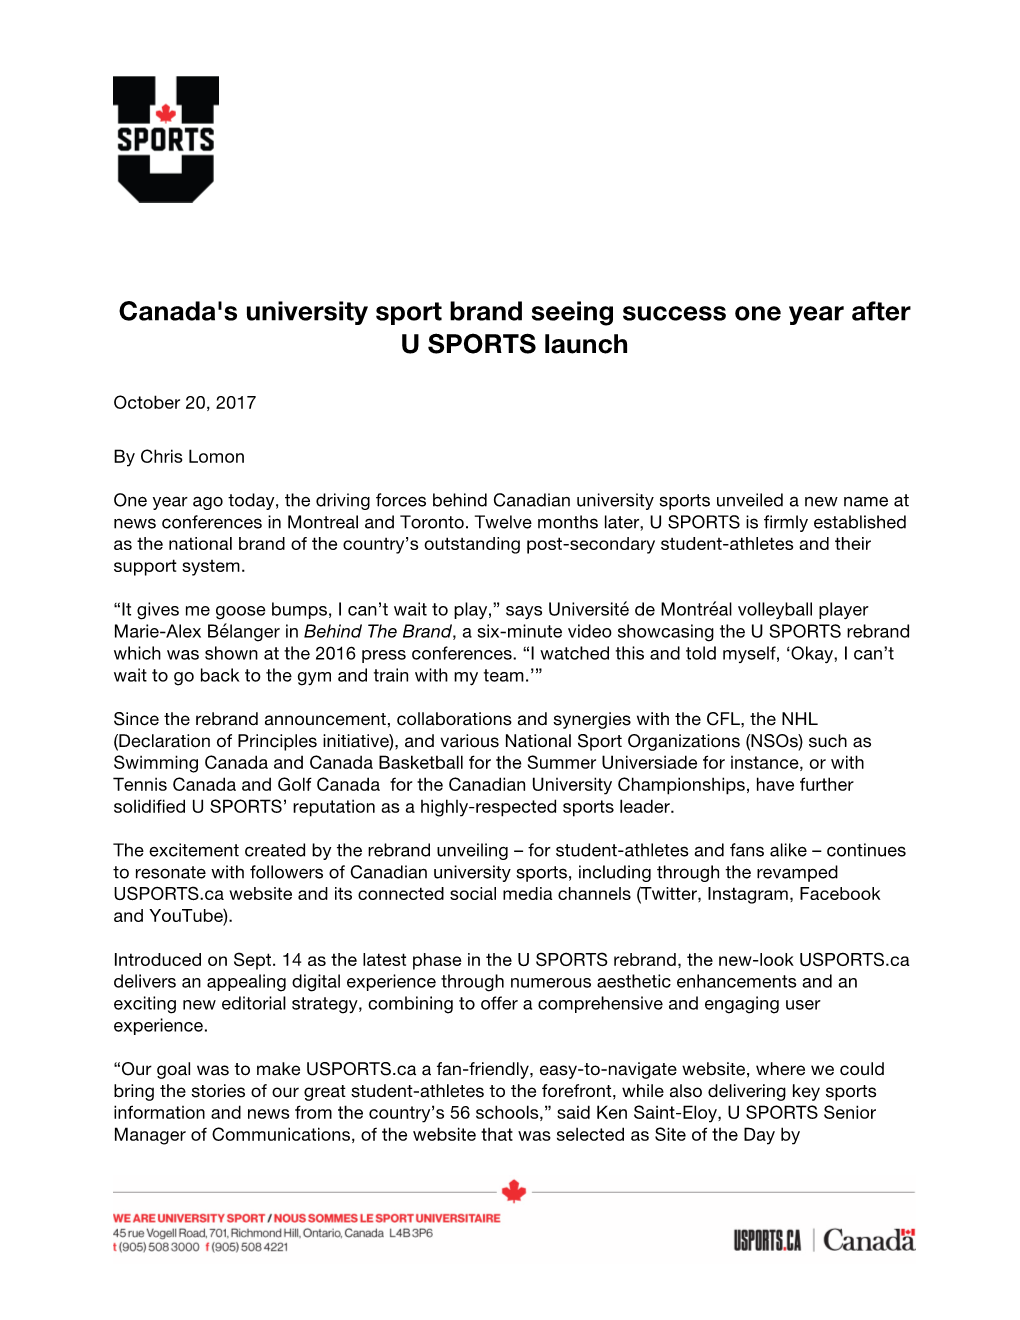 2017/10/20 Canada's University Sport Brand Seeing Success One Year